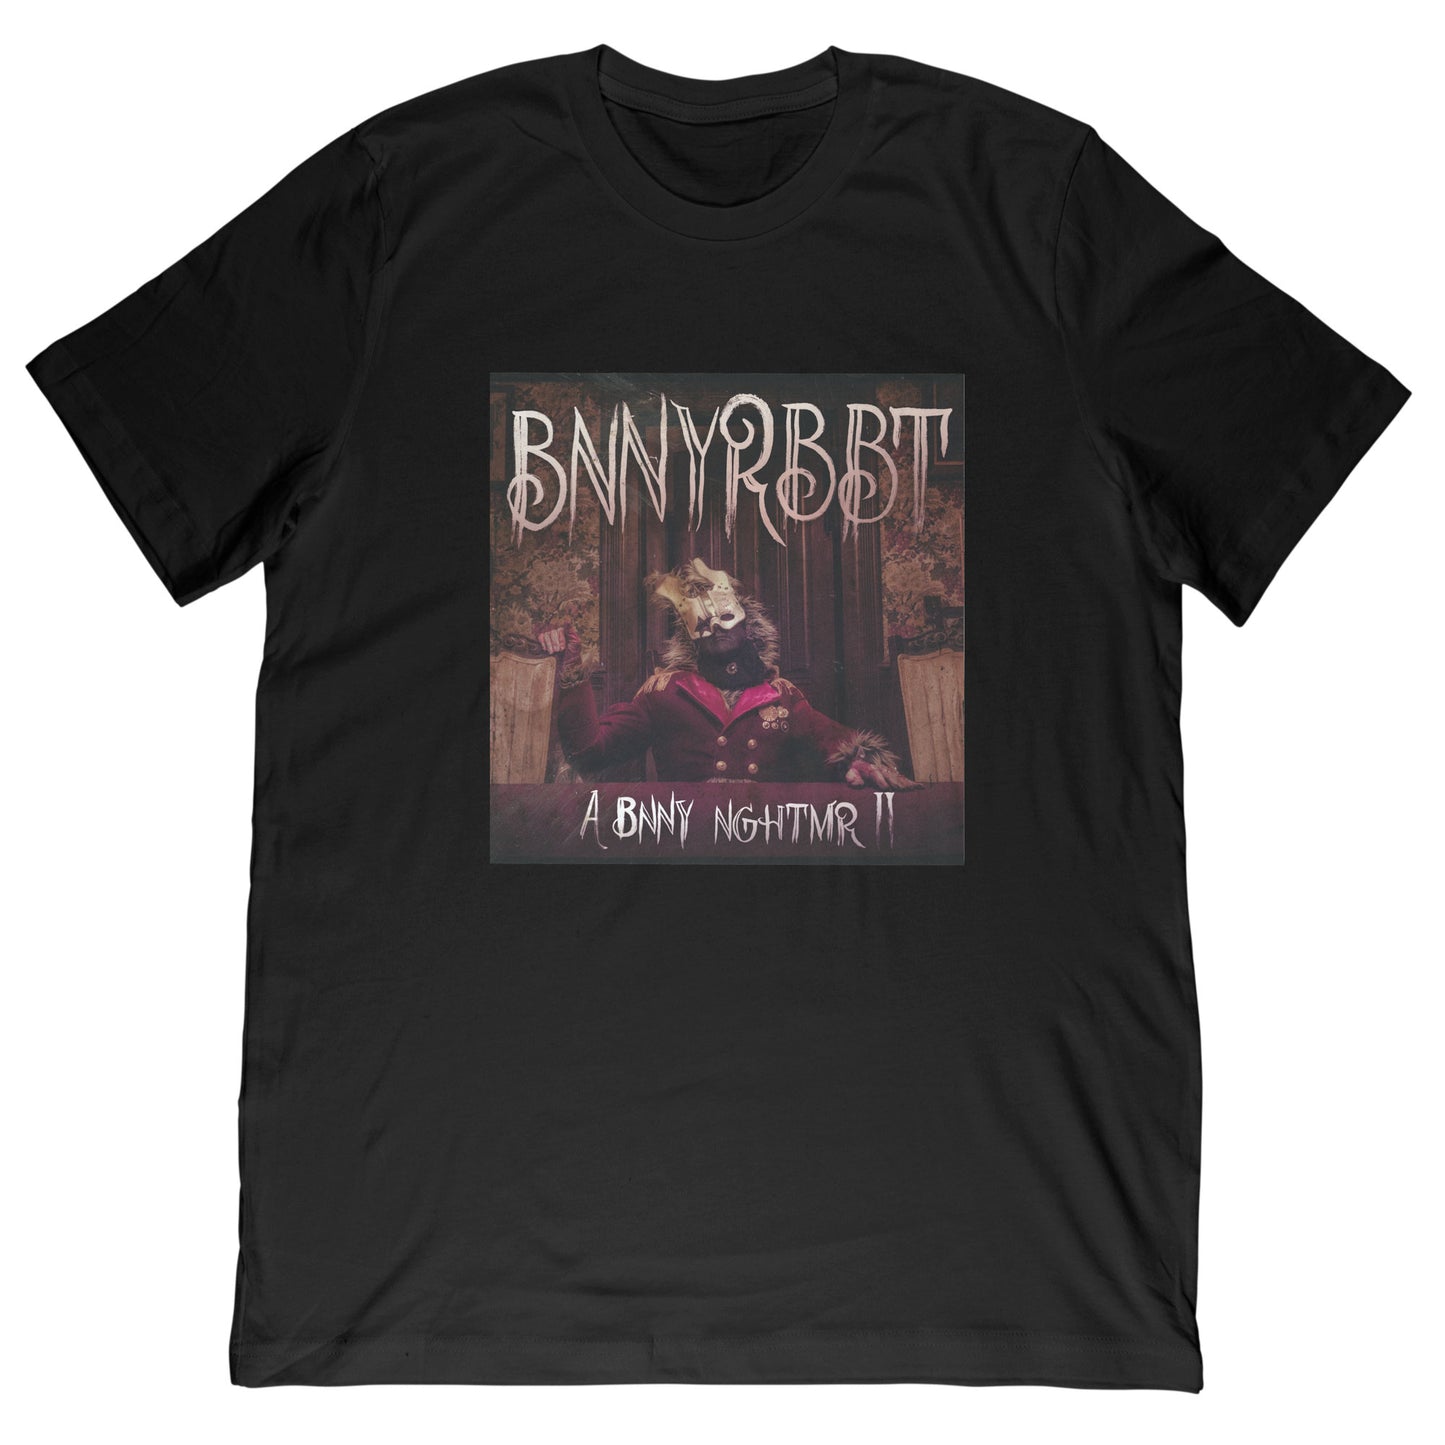 A BNNY NGHTMR Tee